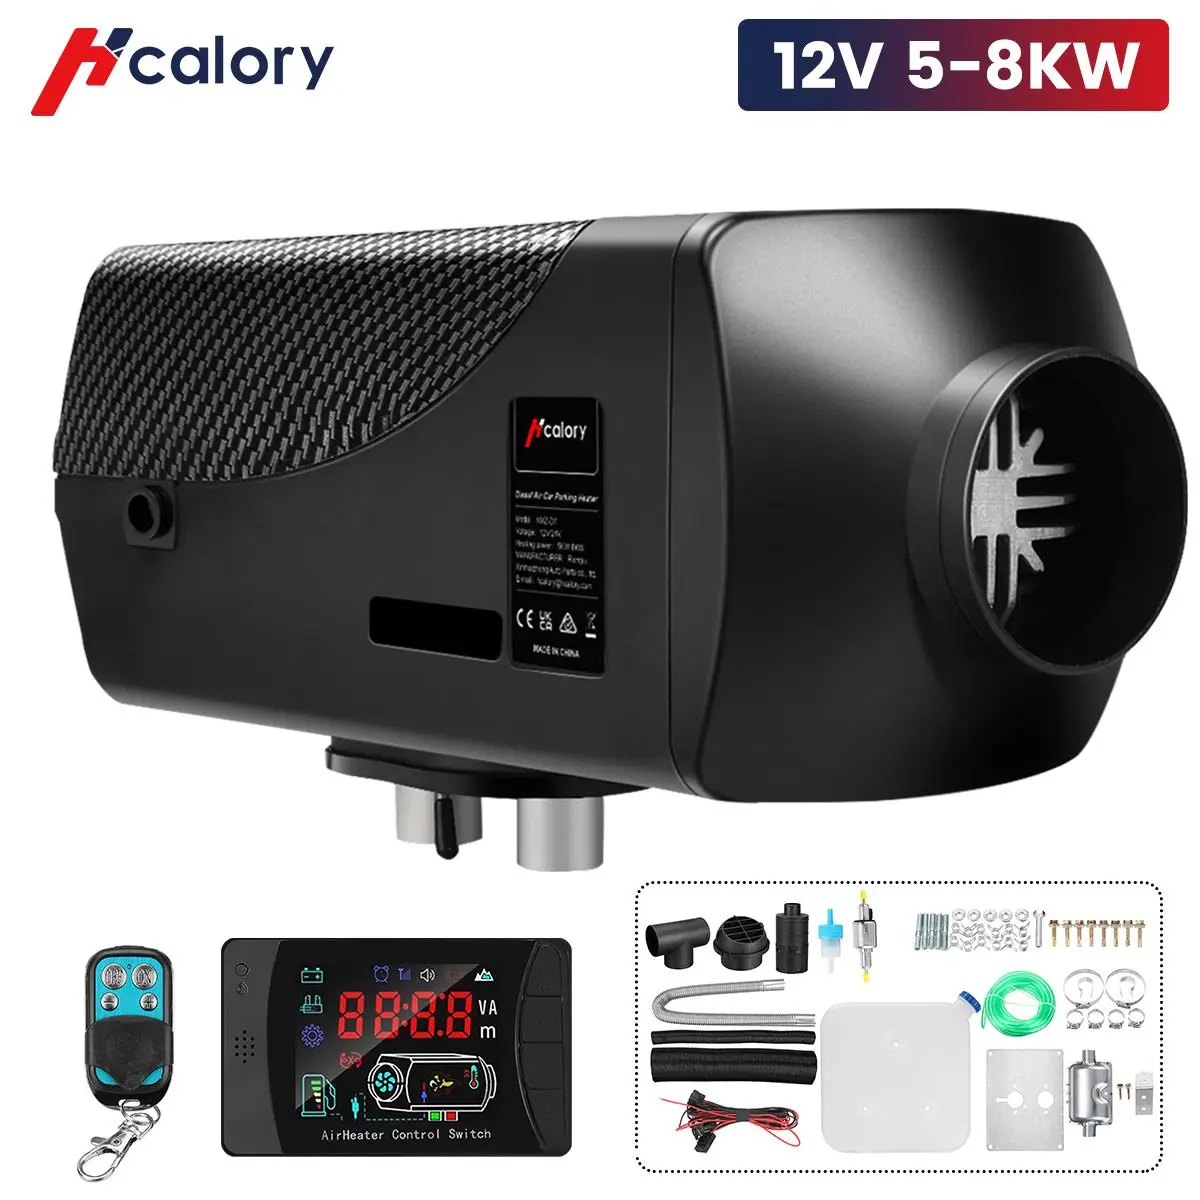 

Hcalory 12V 24V 5-8KW Car Heater Air Diesel Heater New LCD Monitor + Tank Remote Control for RV Boats Trailer Truck Motorhome